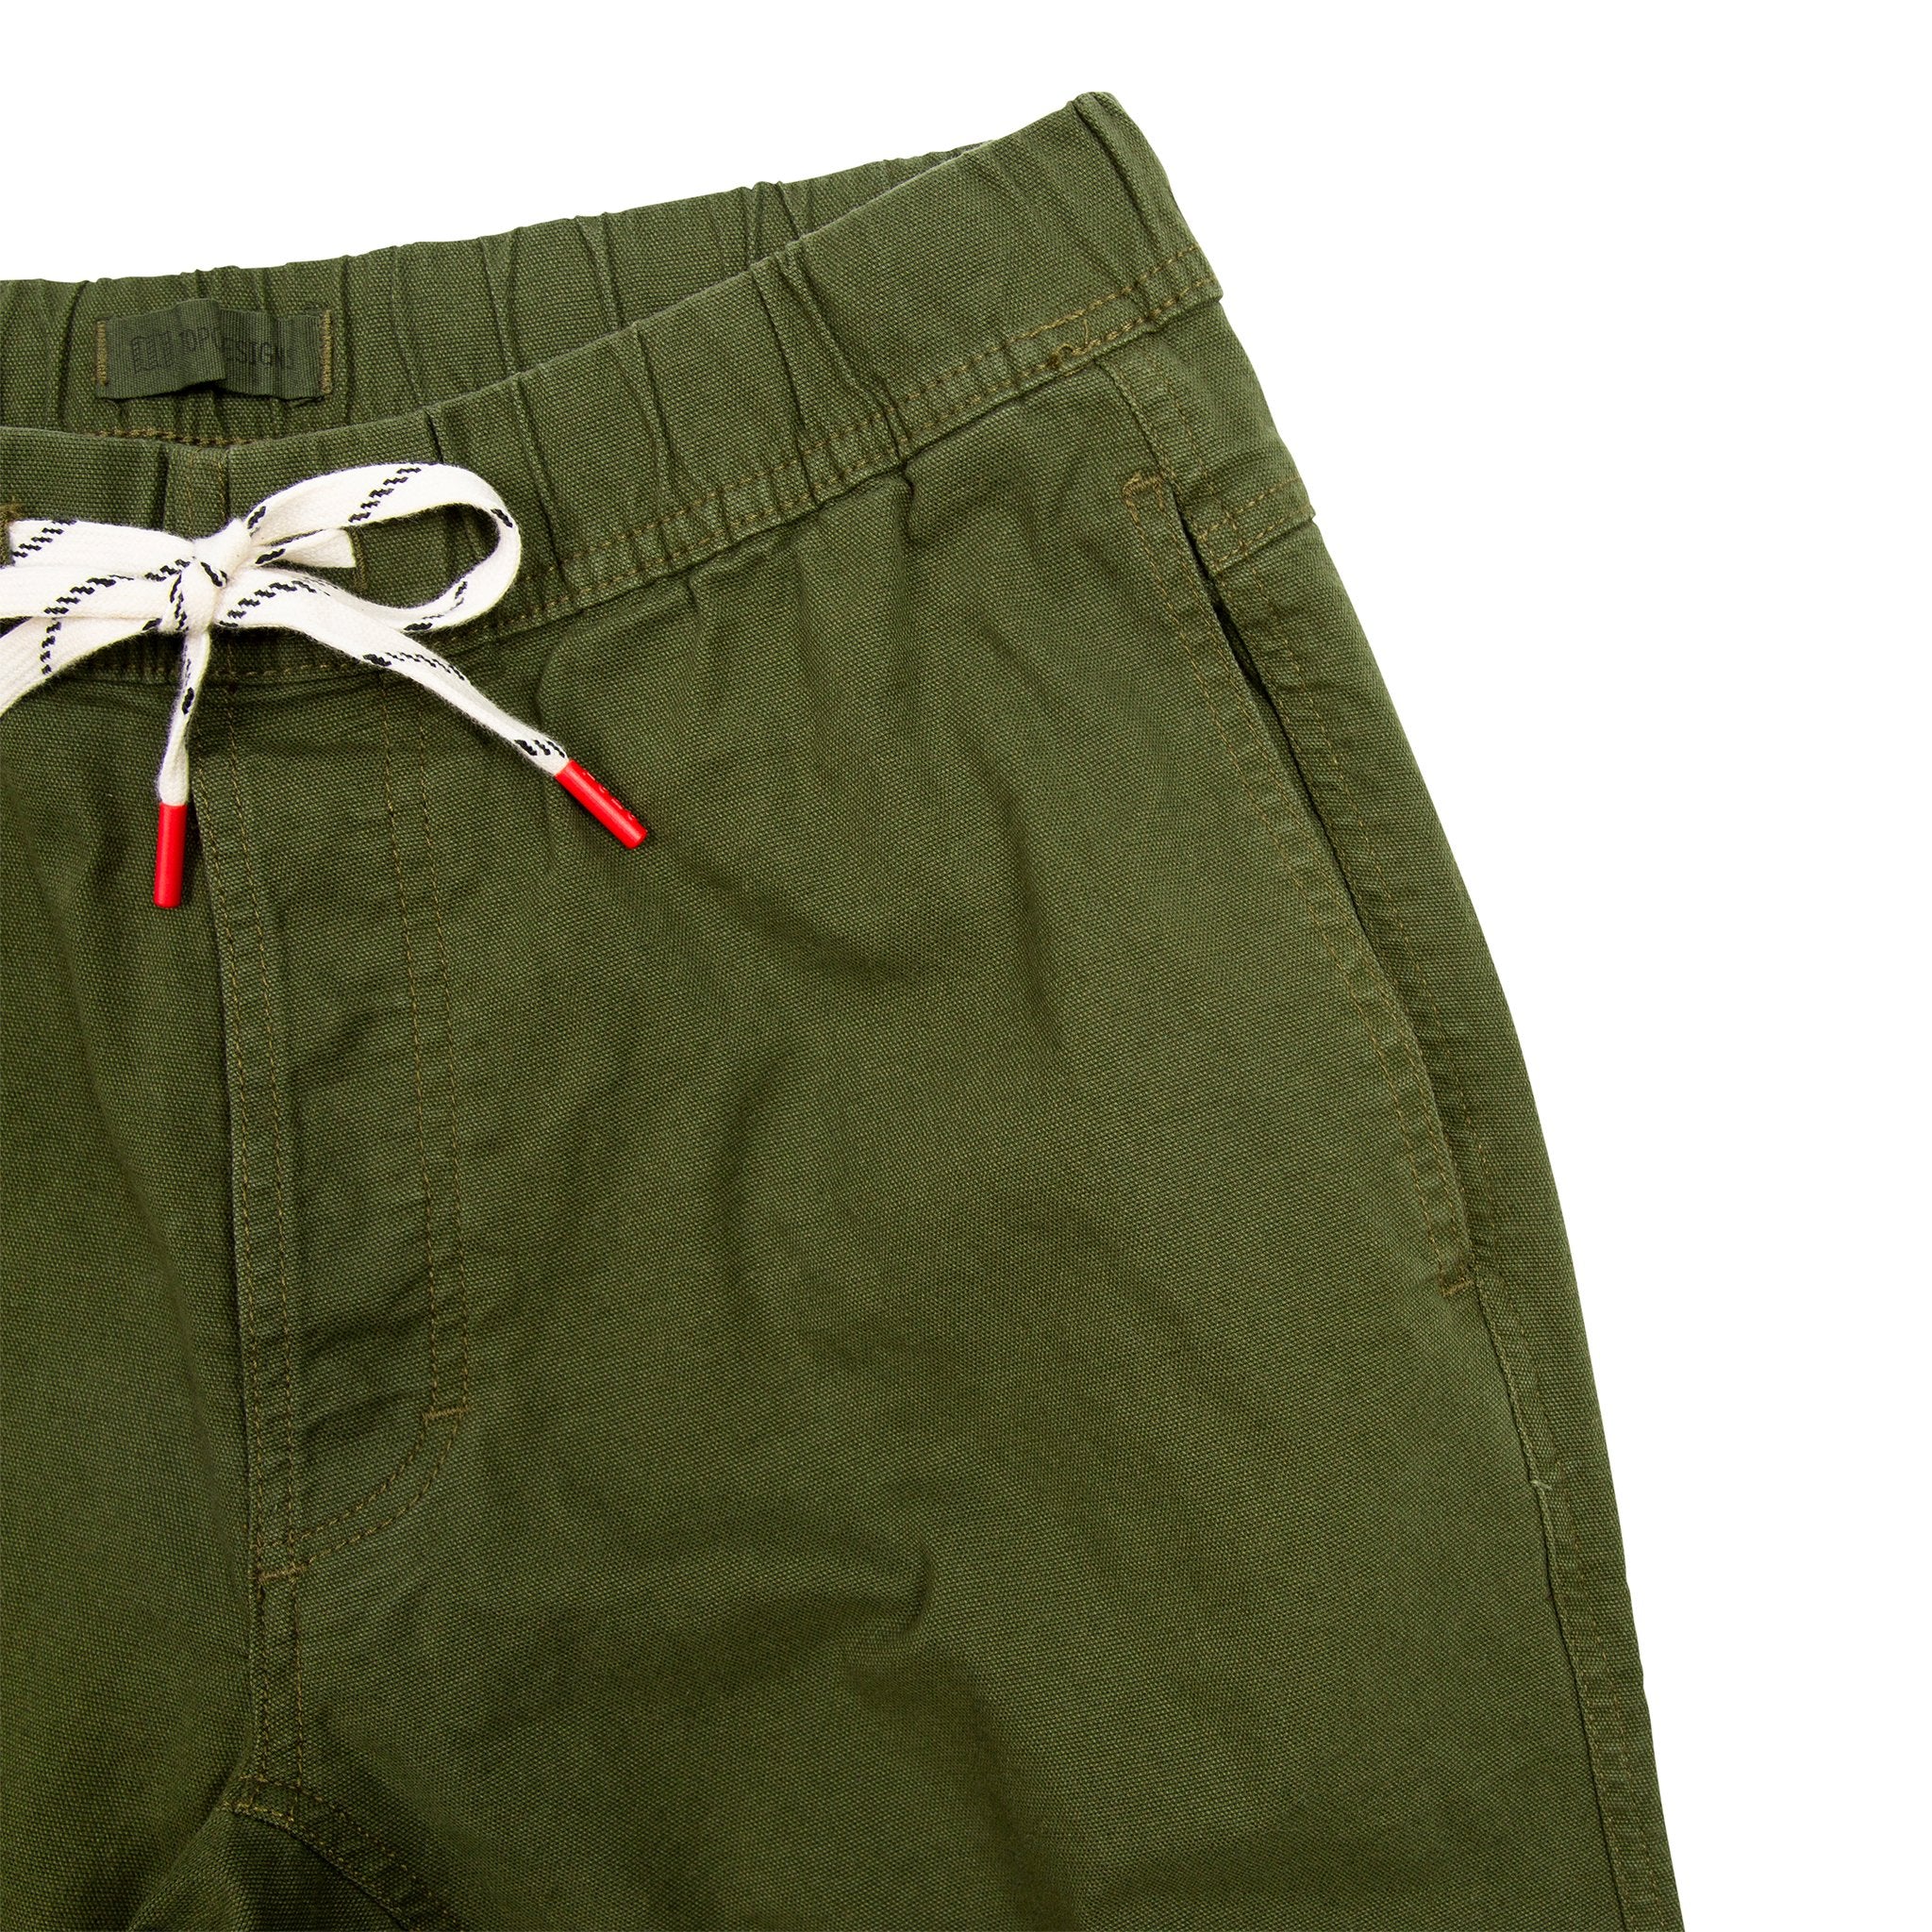 General detail shot of Topo Designs Men's Dirt Pants in Olive green showing drawstring waistband and hand pocket.